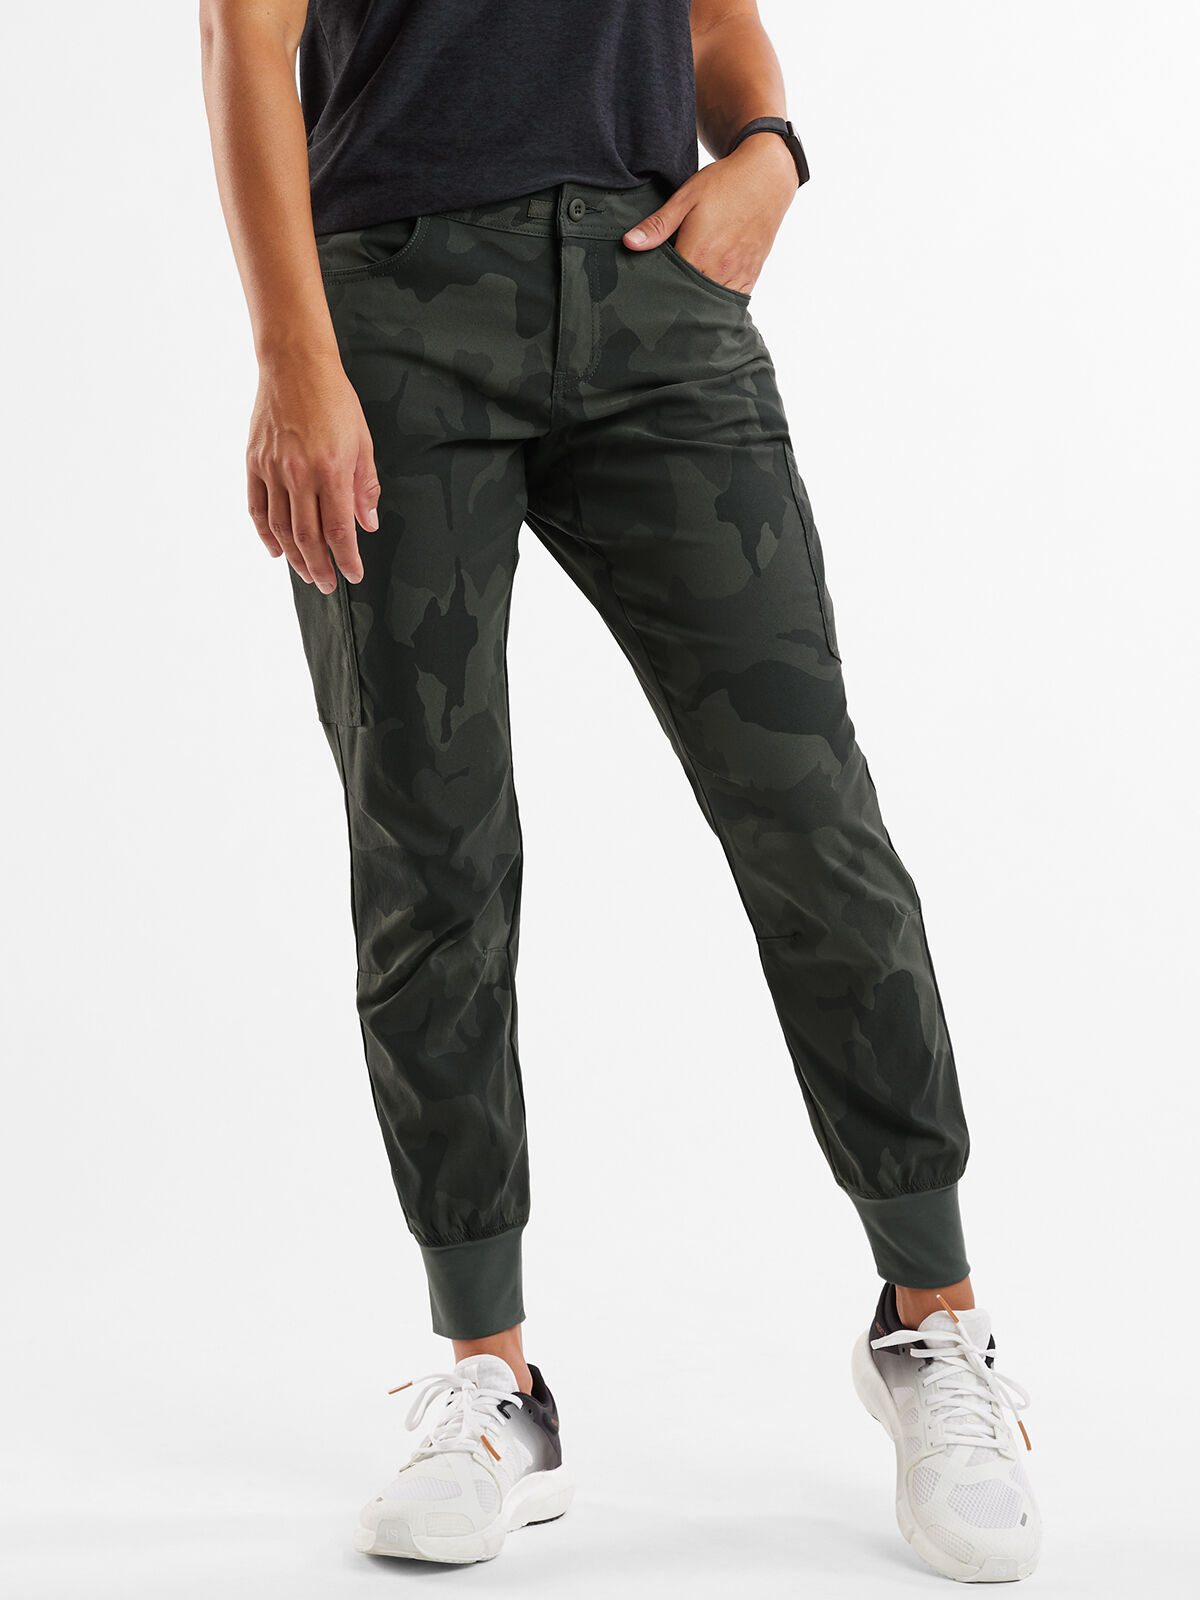 DISOLVE Women Drawstrings Jogger Sweatpants Camouflage Stretch Lounge Pants  with Pockets Free Size(26 Till 30) Green Color : Amazon.in: Clothing &  Accessories